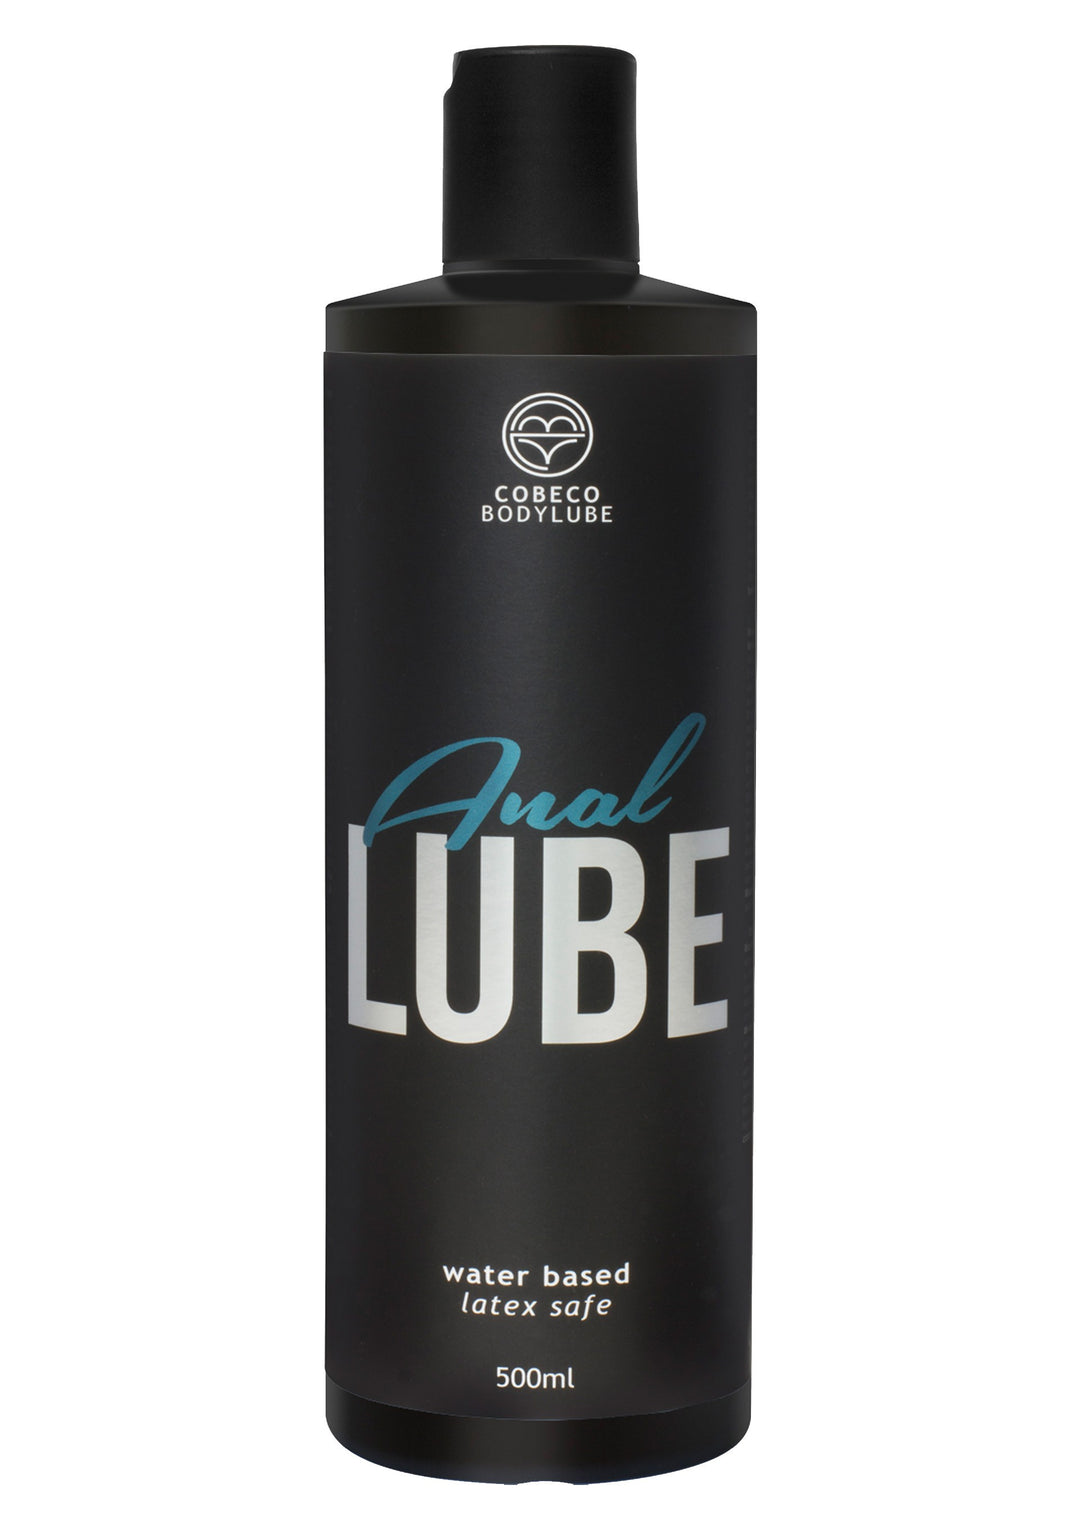 Analube cobeco waterbased anal lubricant 500 ml